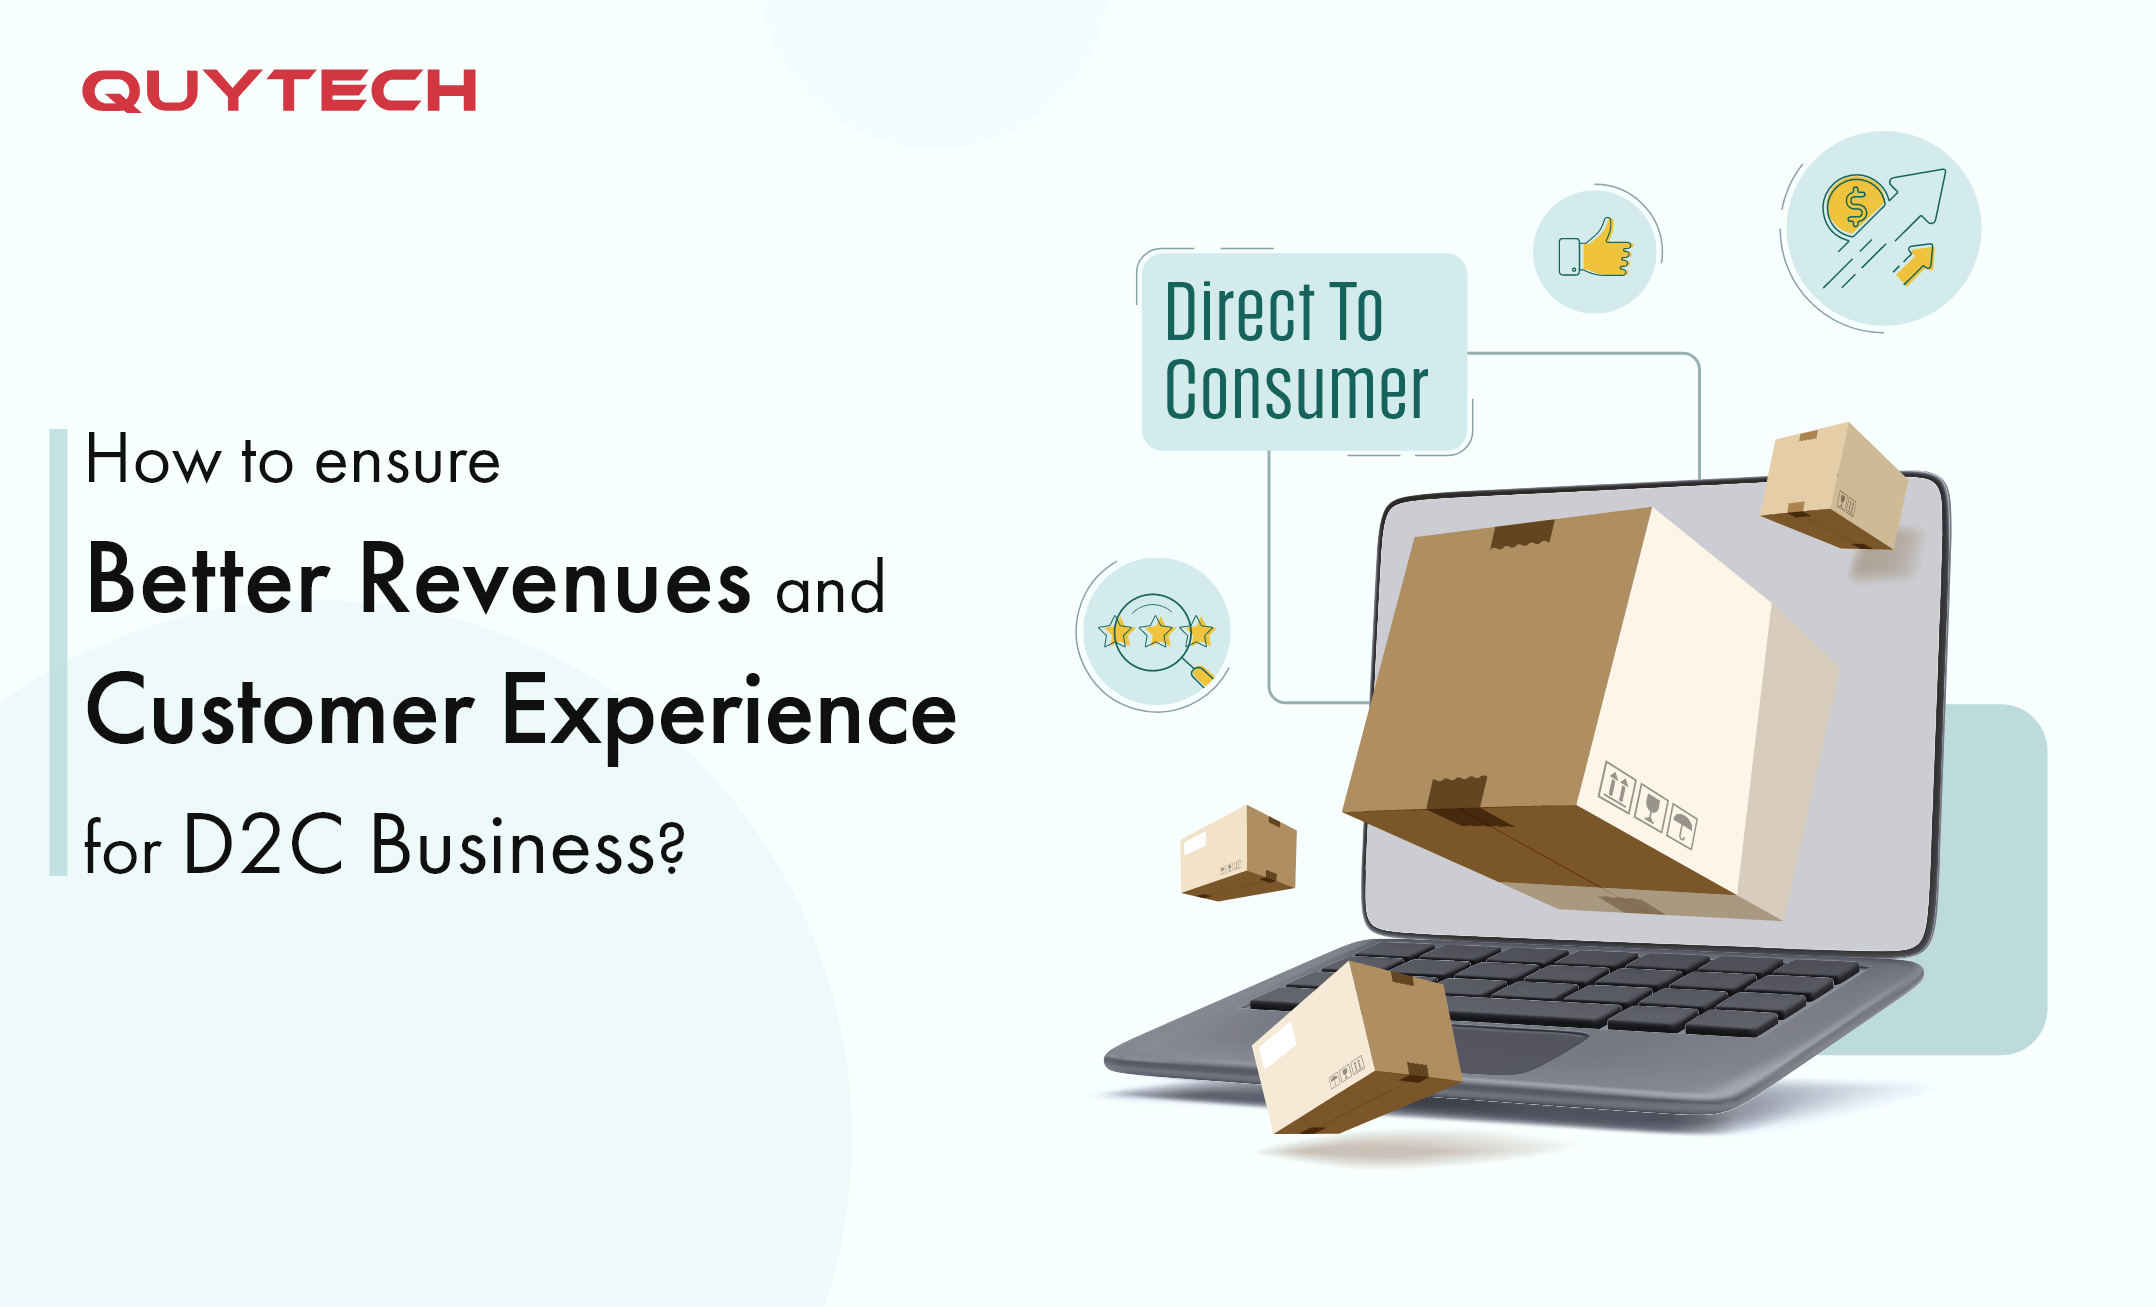 D2C Business revenues and customer experience